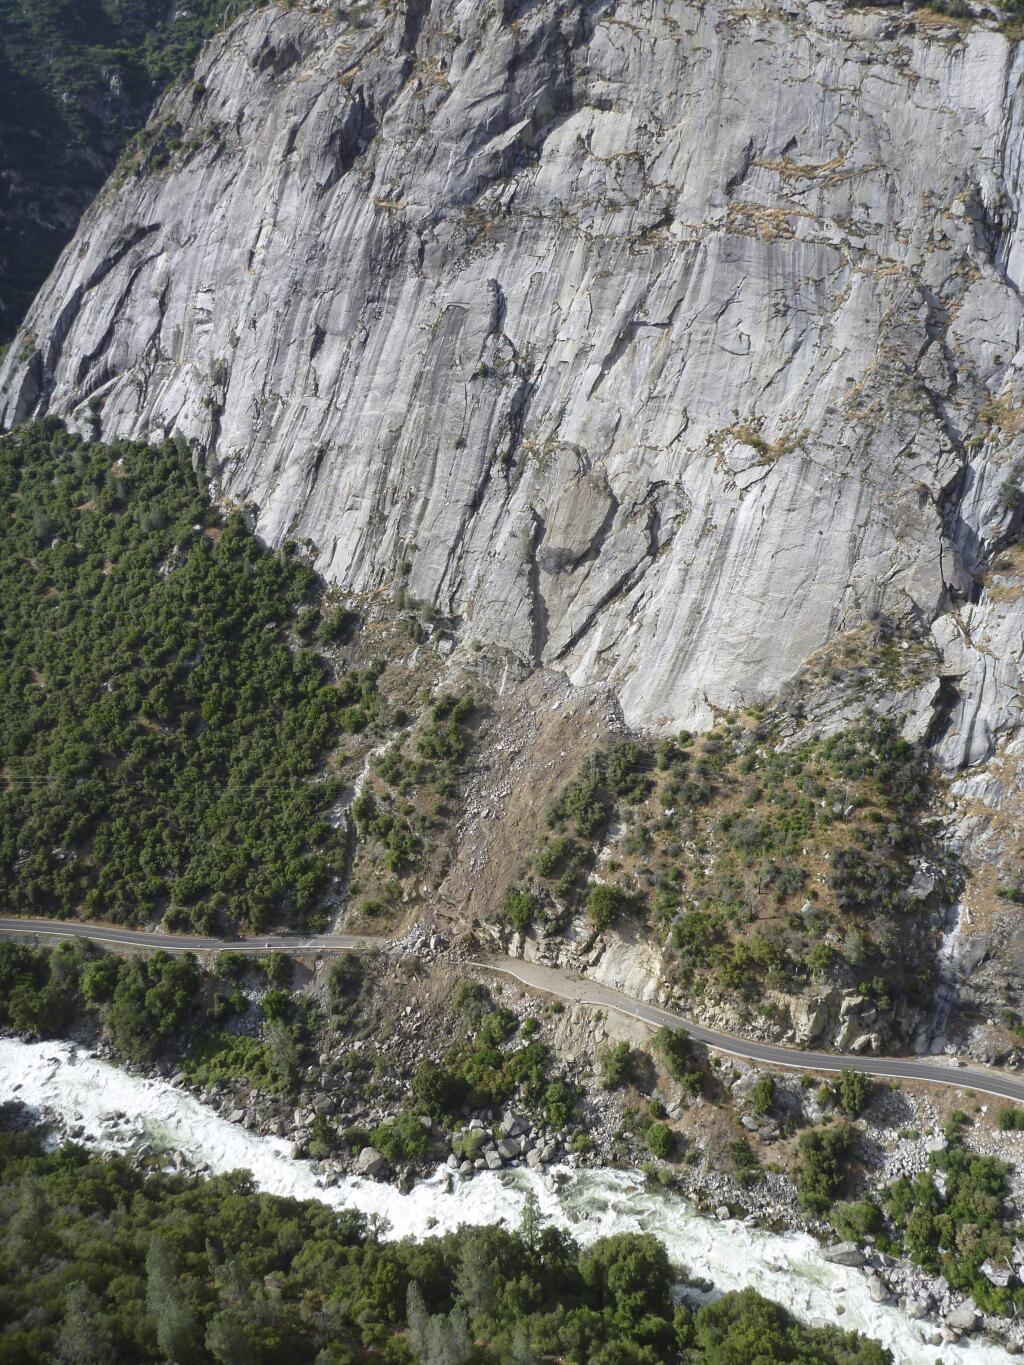 This Monday, June 12, 2017, photo provided by the National Park Service shows a rockslide that blocked one of the main roads into Yosemite National Park in California. (NPS Photo via AP)